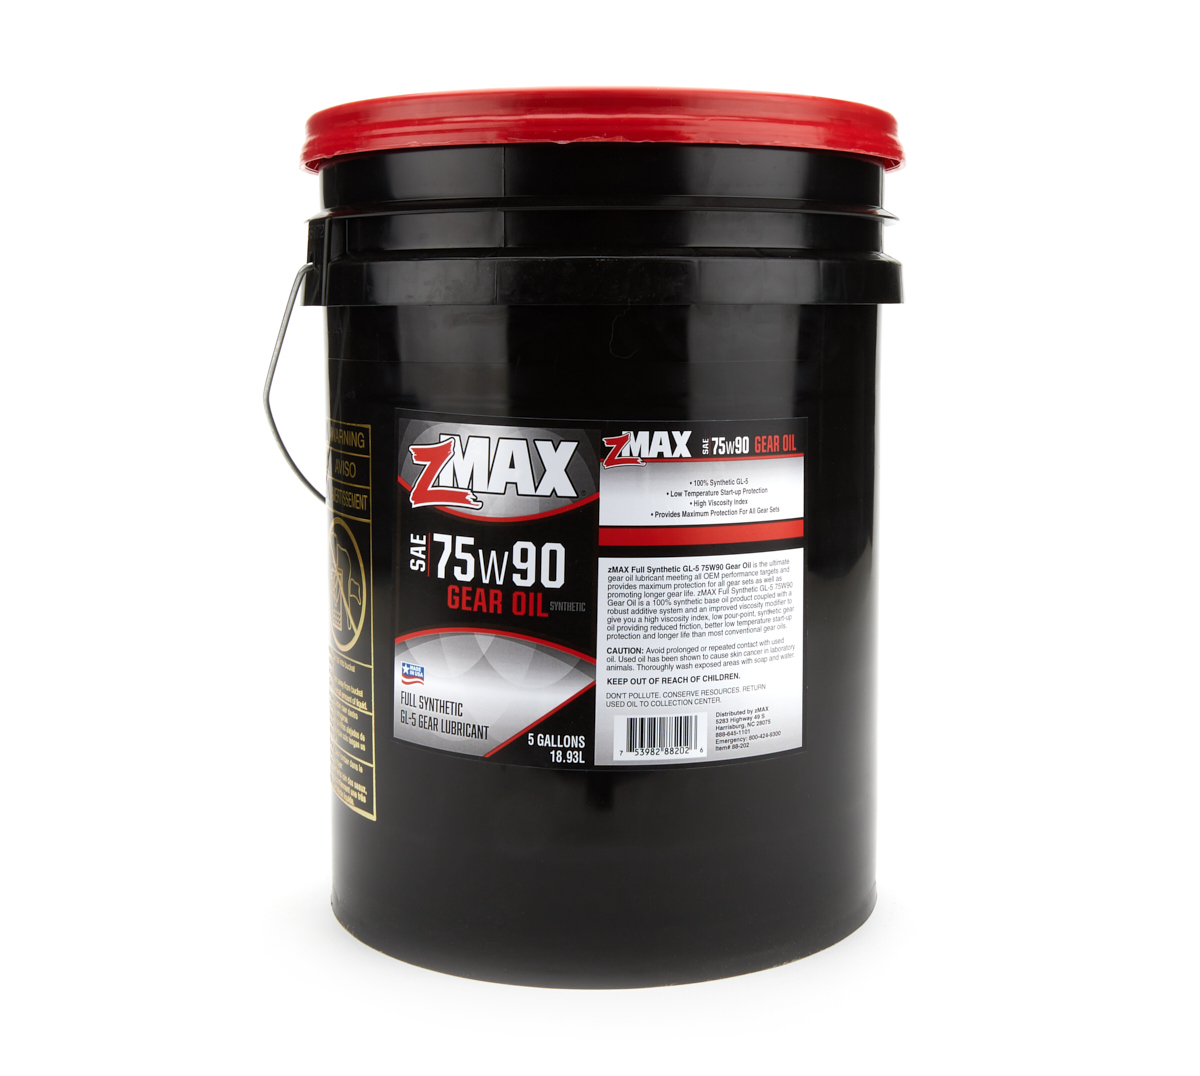 ZMAX Gear Oil 75W90 Limited Slip Additive Synthetic 5 gal Bucket Each